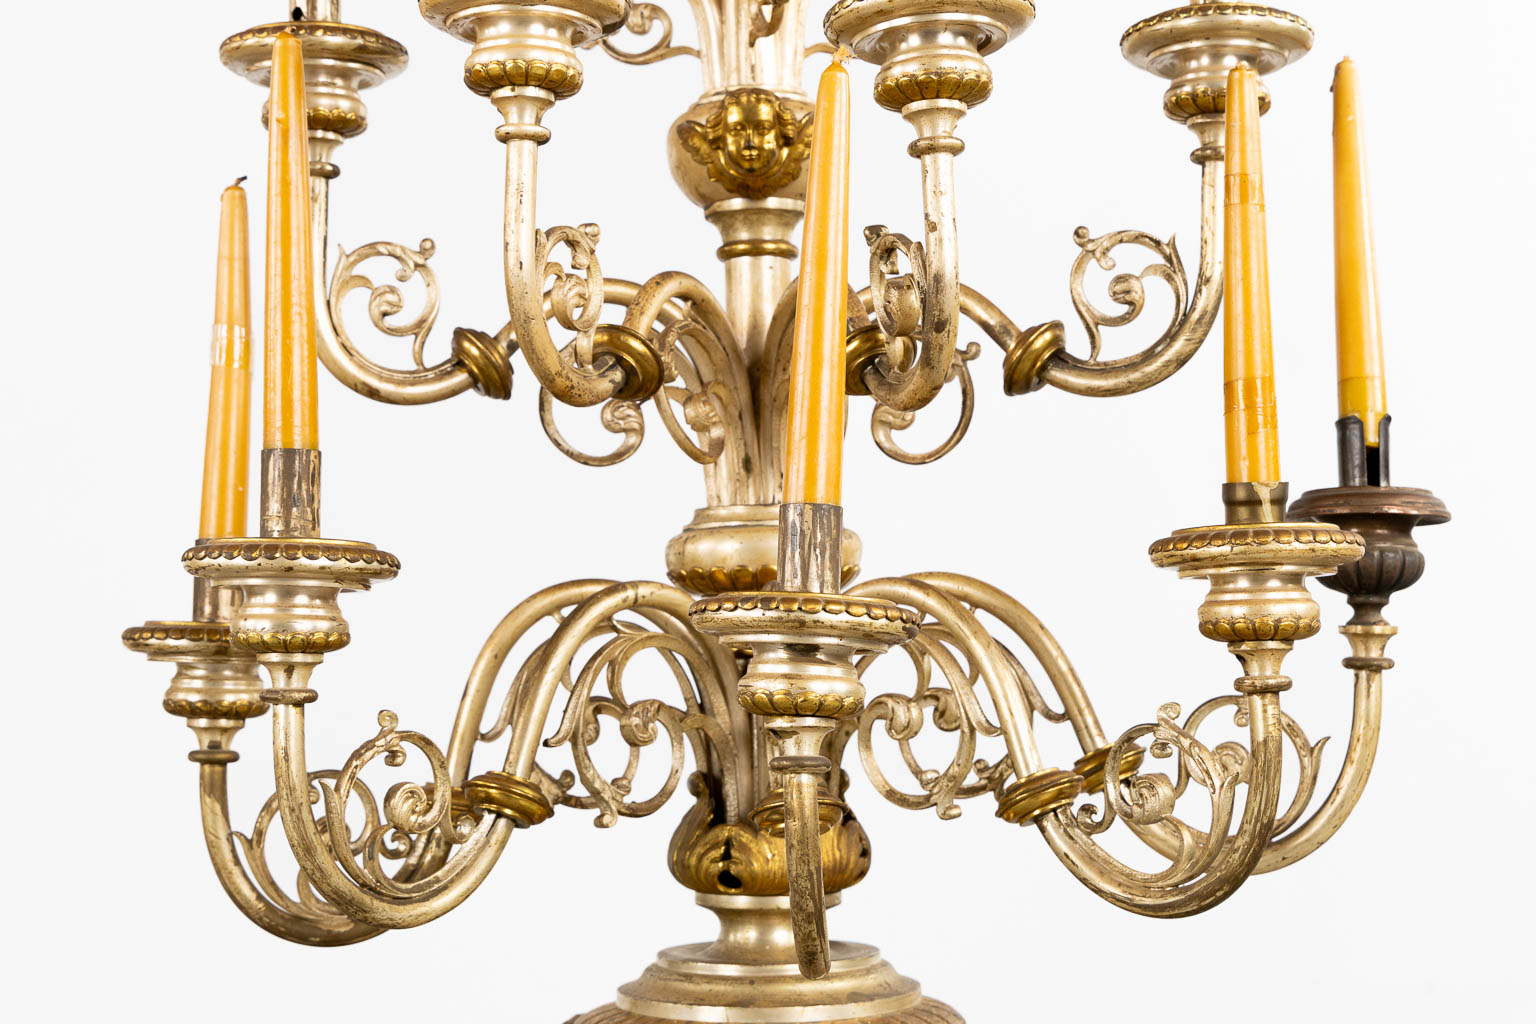 An impressive pair of candelabra, 15 candles, gold and silver-plated metal. (L:44 x W:60 x H:138 cm) - Image 11 of 12